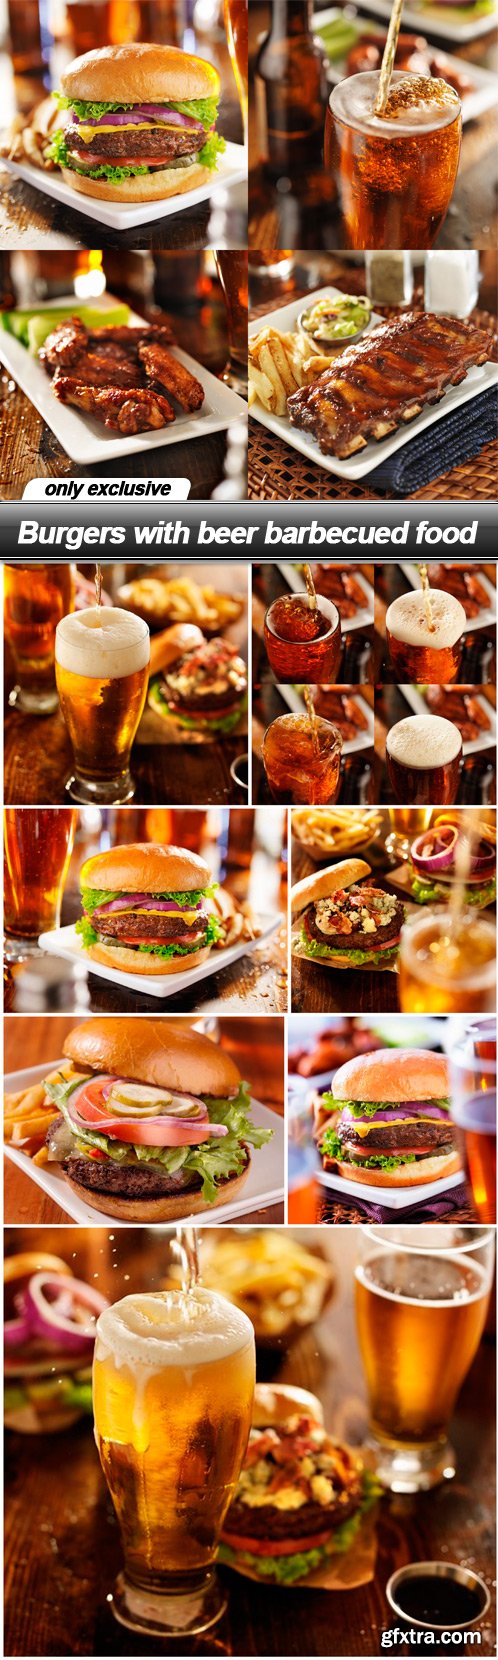 Burgers with beer barbecued food - 8 UHQ JPEG